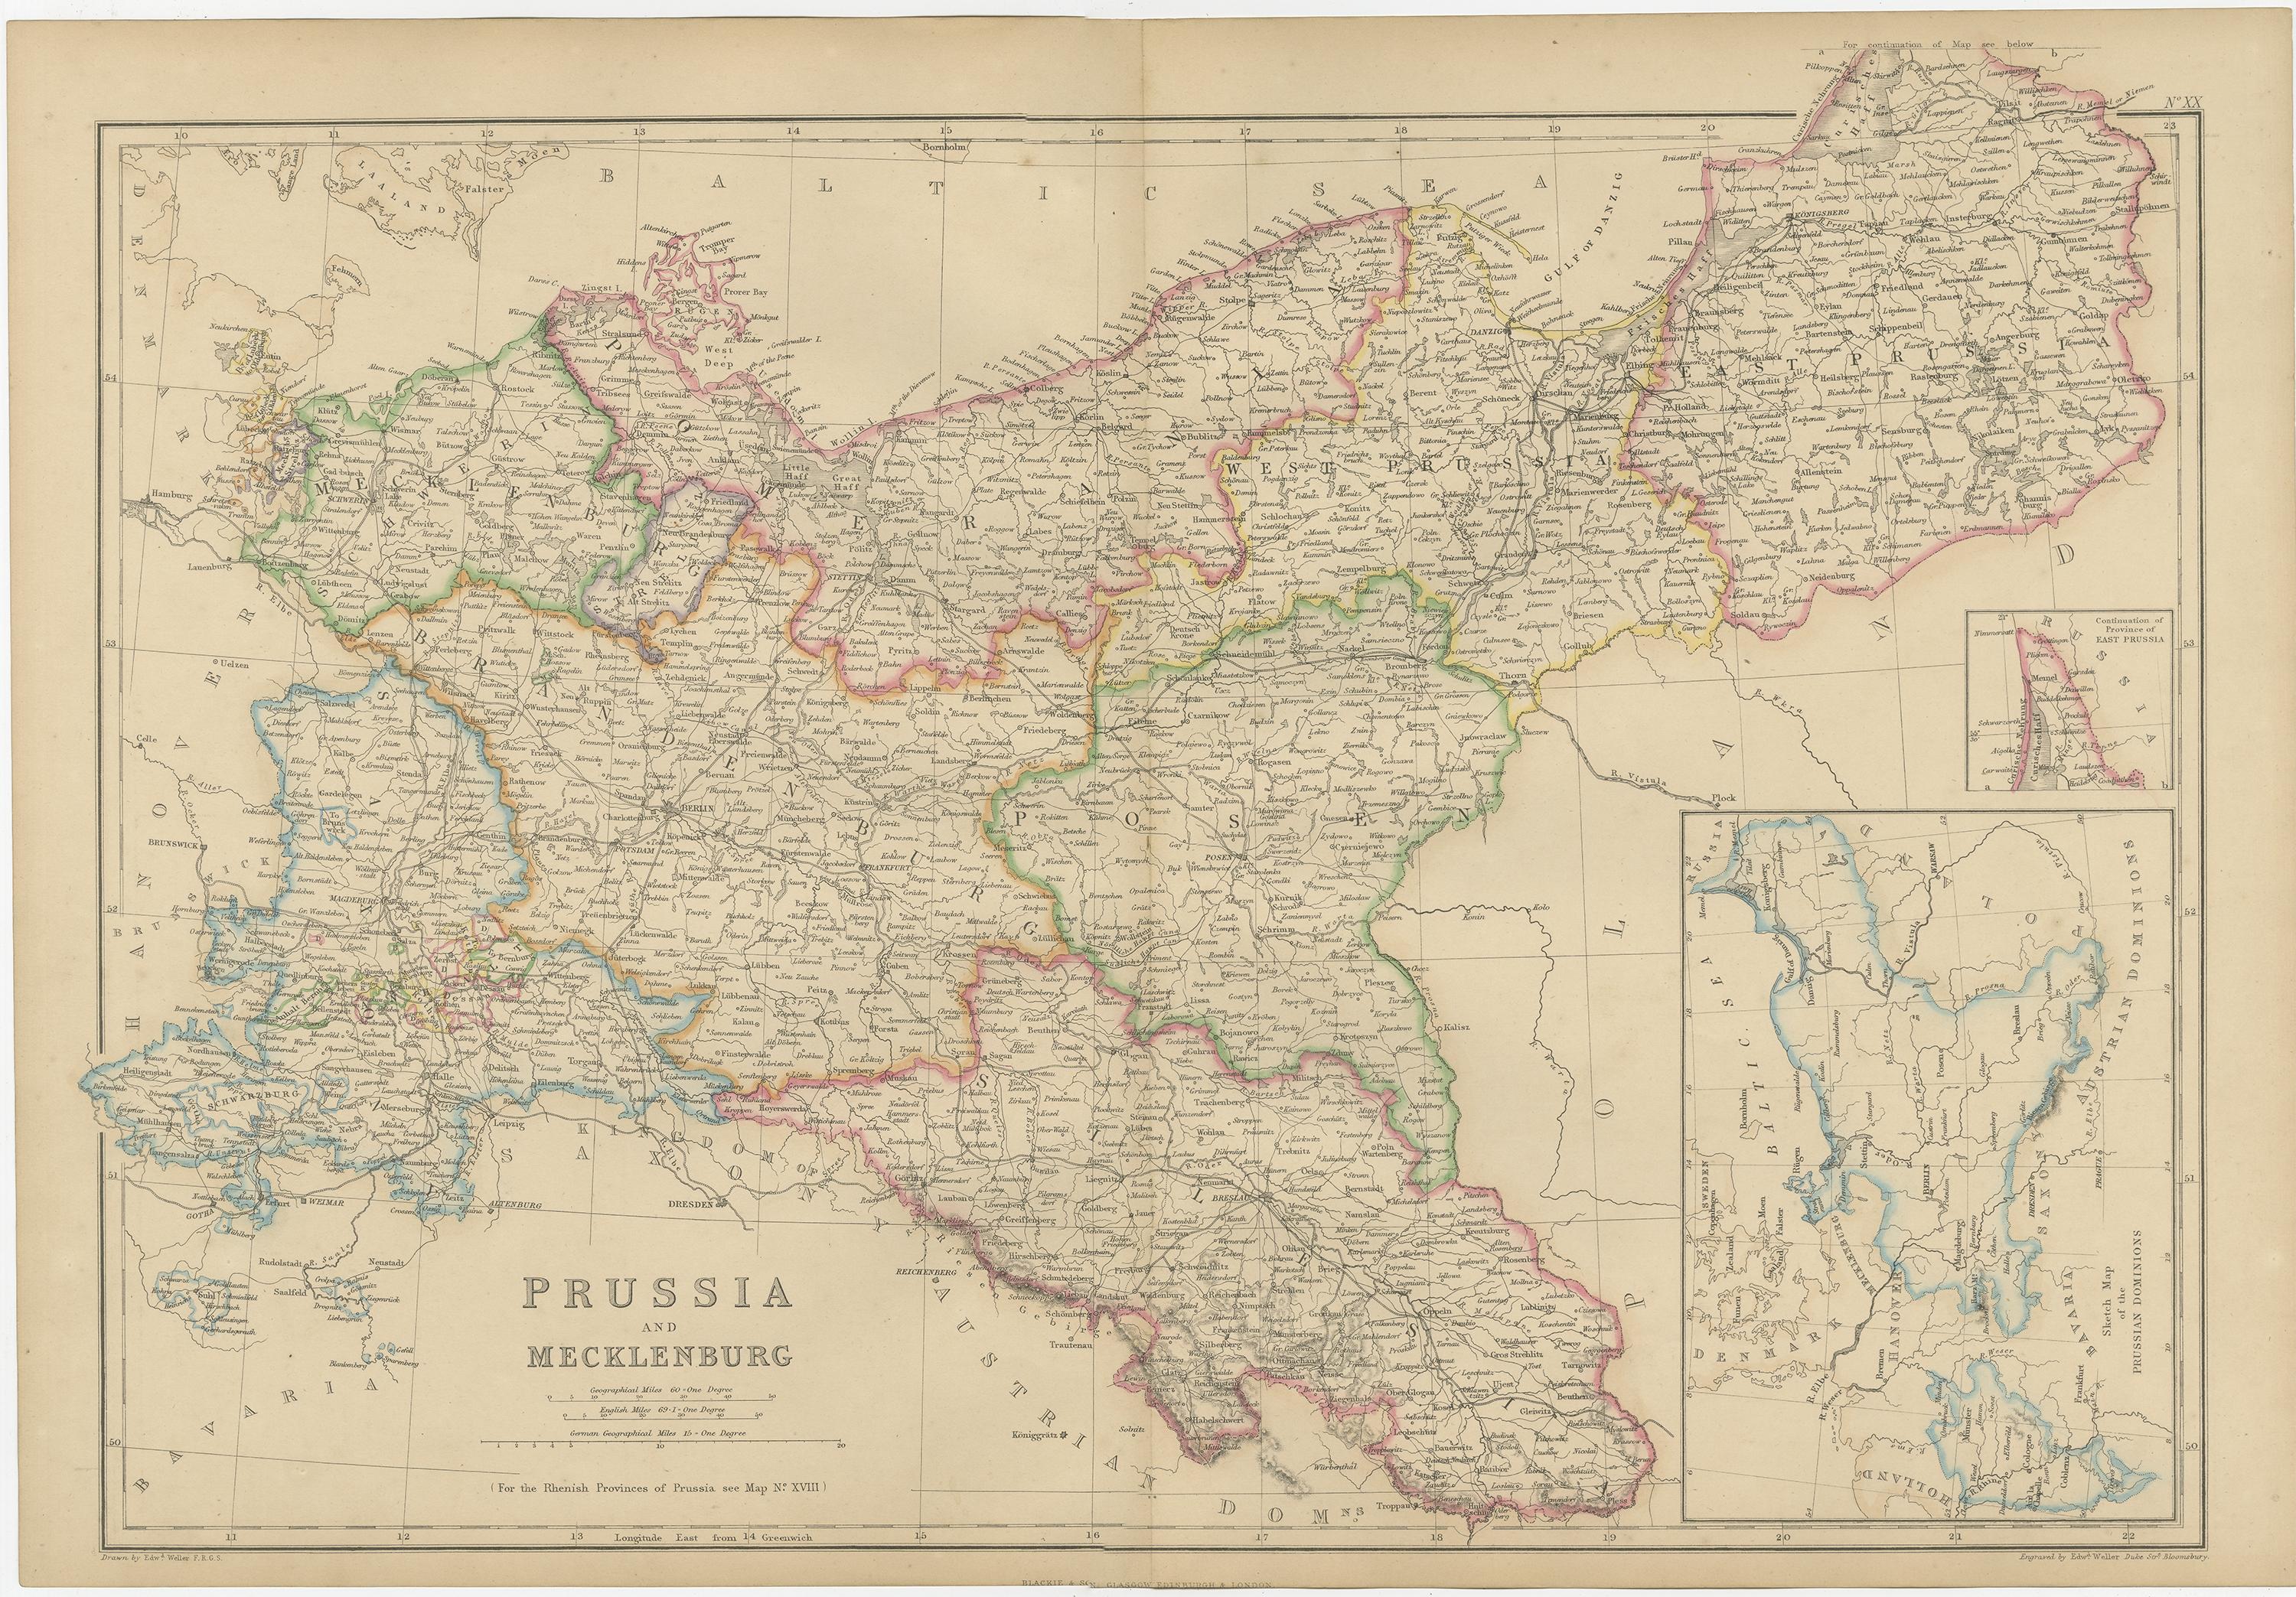 Antique map titled 'Prussia and Mecklenburg'. Original antique map of Prussia and Mecklenburg with inset map of East Prussia. This map originates from ‘The Imperial Atlas of Modern Geography’. Published by W. G. Blackie, 1859.